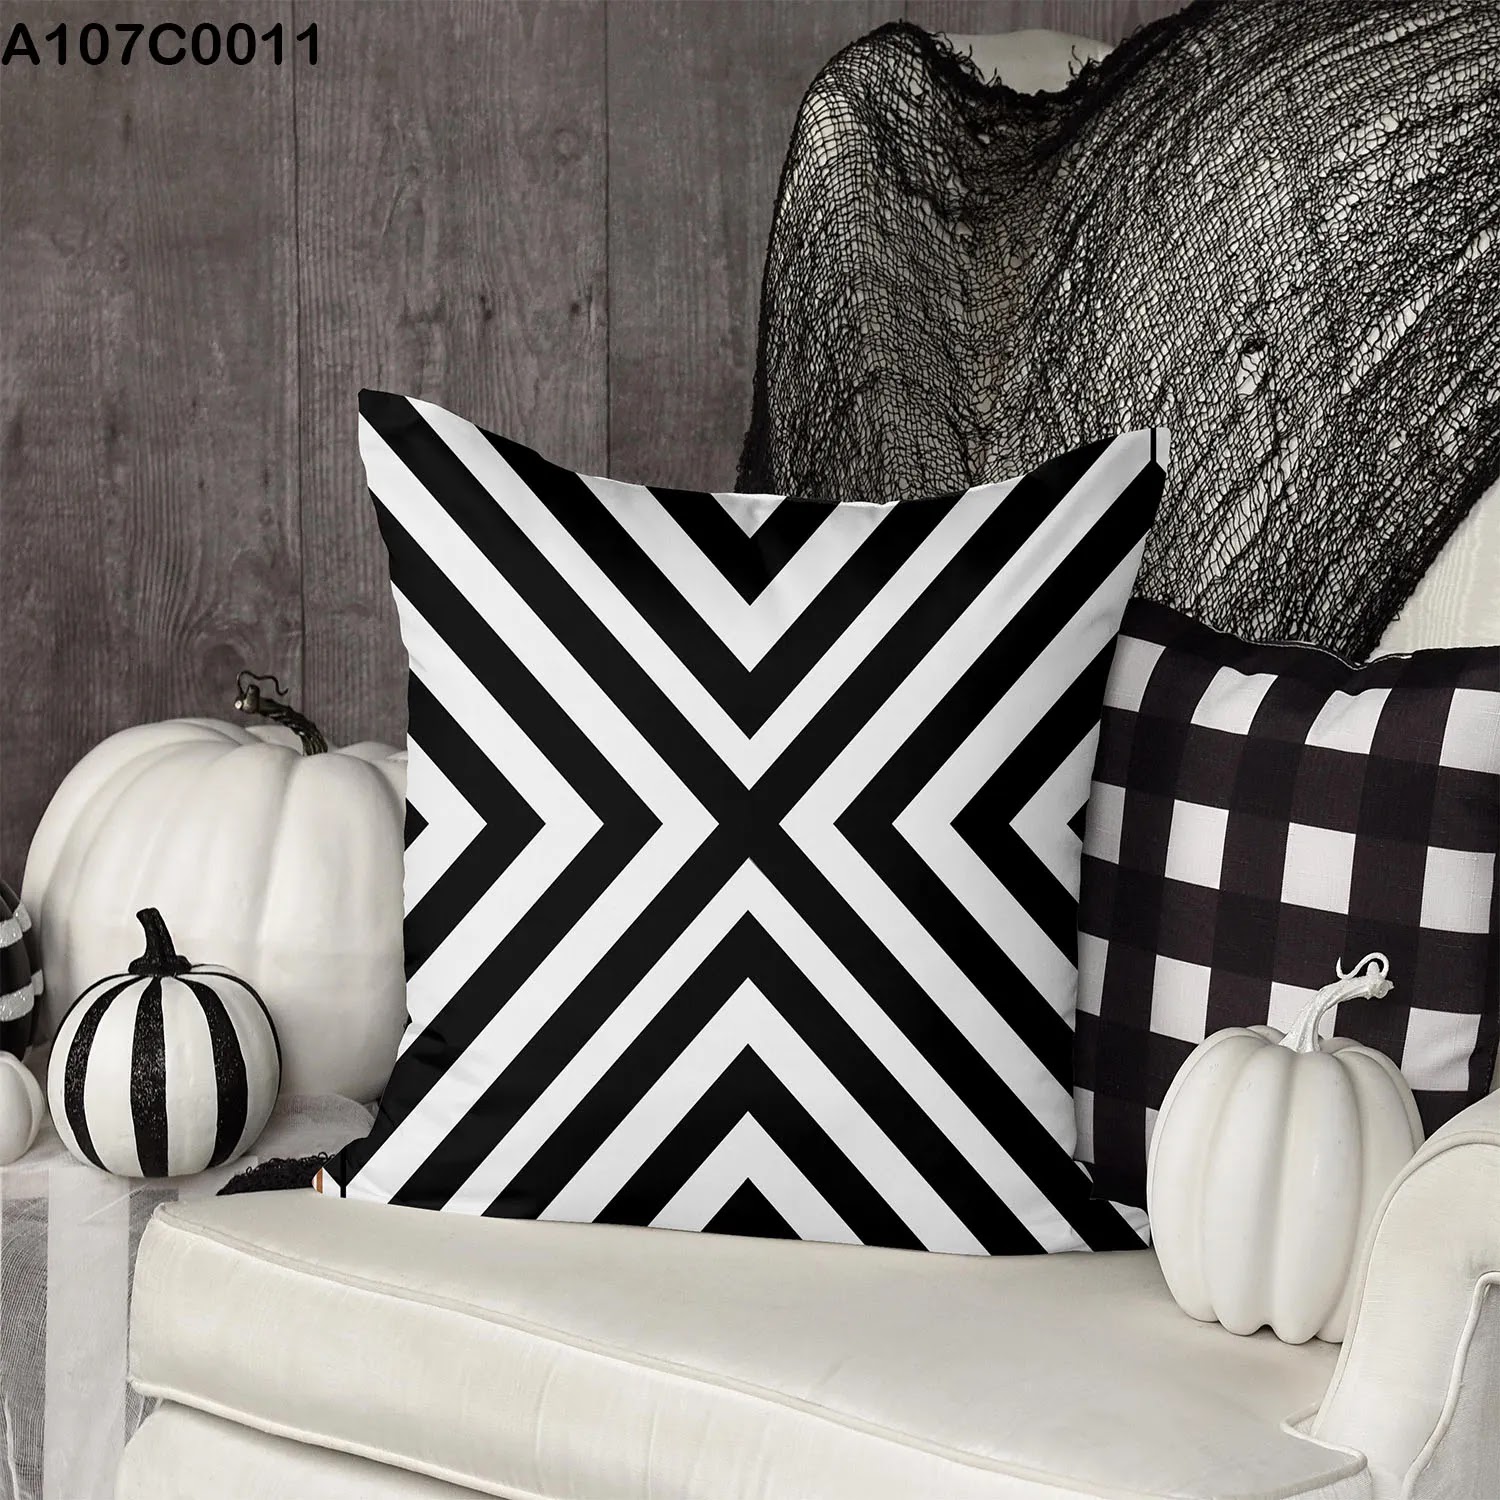 Pillow case with white and black triangles